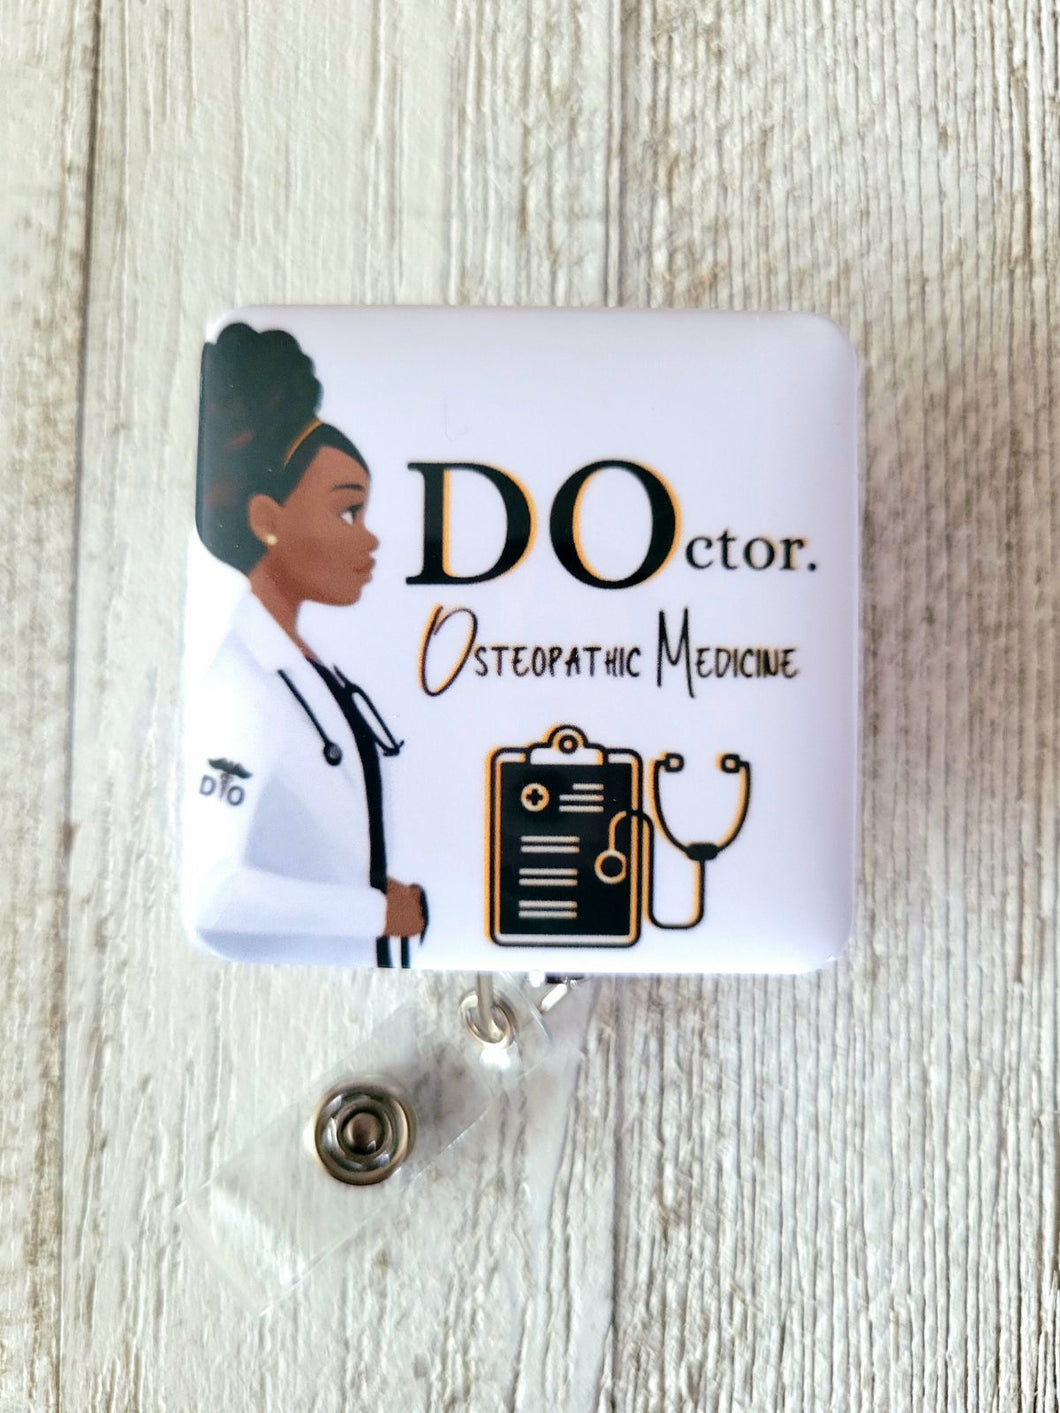 65 Best Gifts For Doctor To Say Thank You and Appreciate Them - Unifury